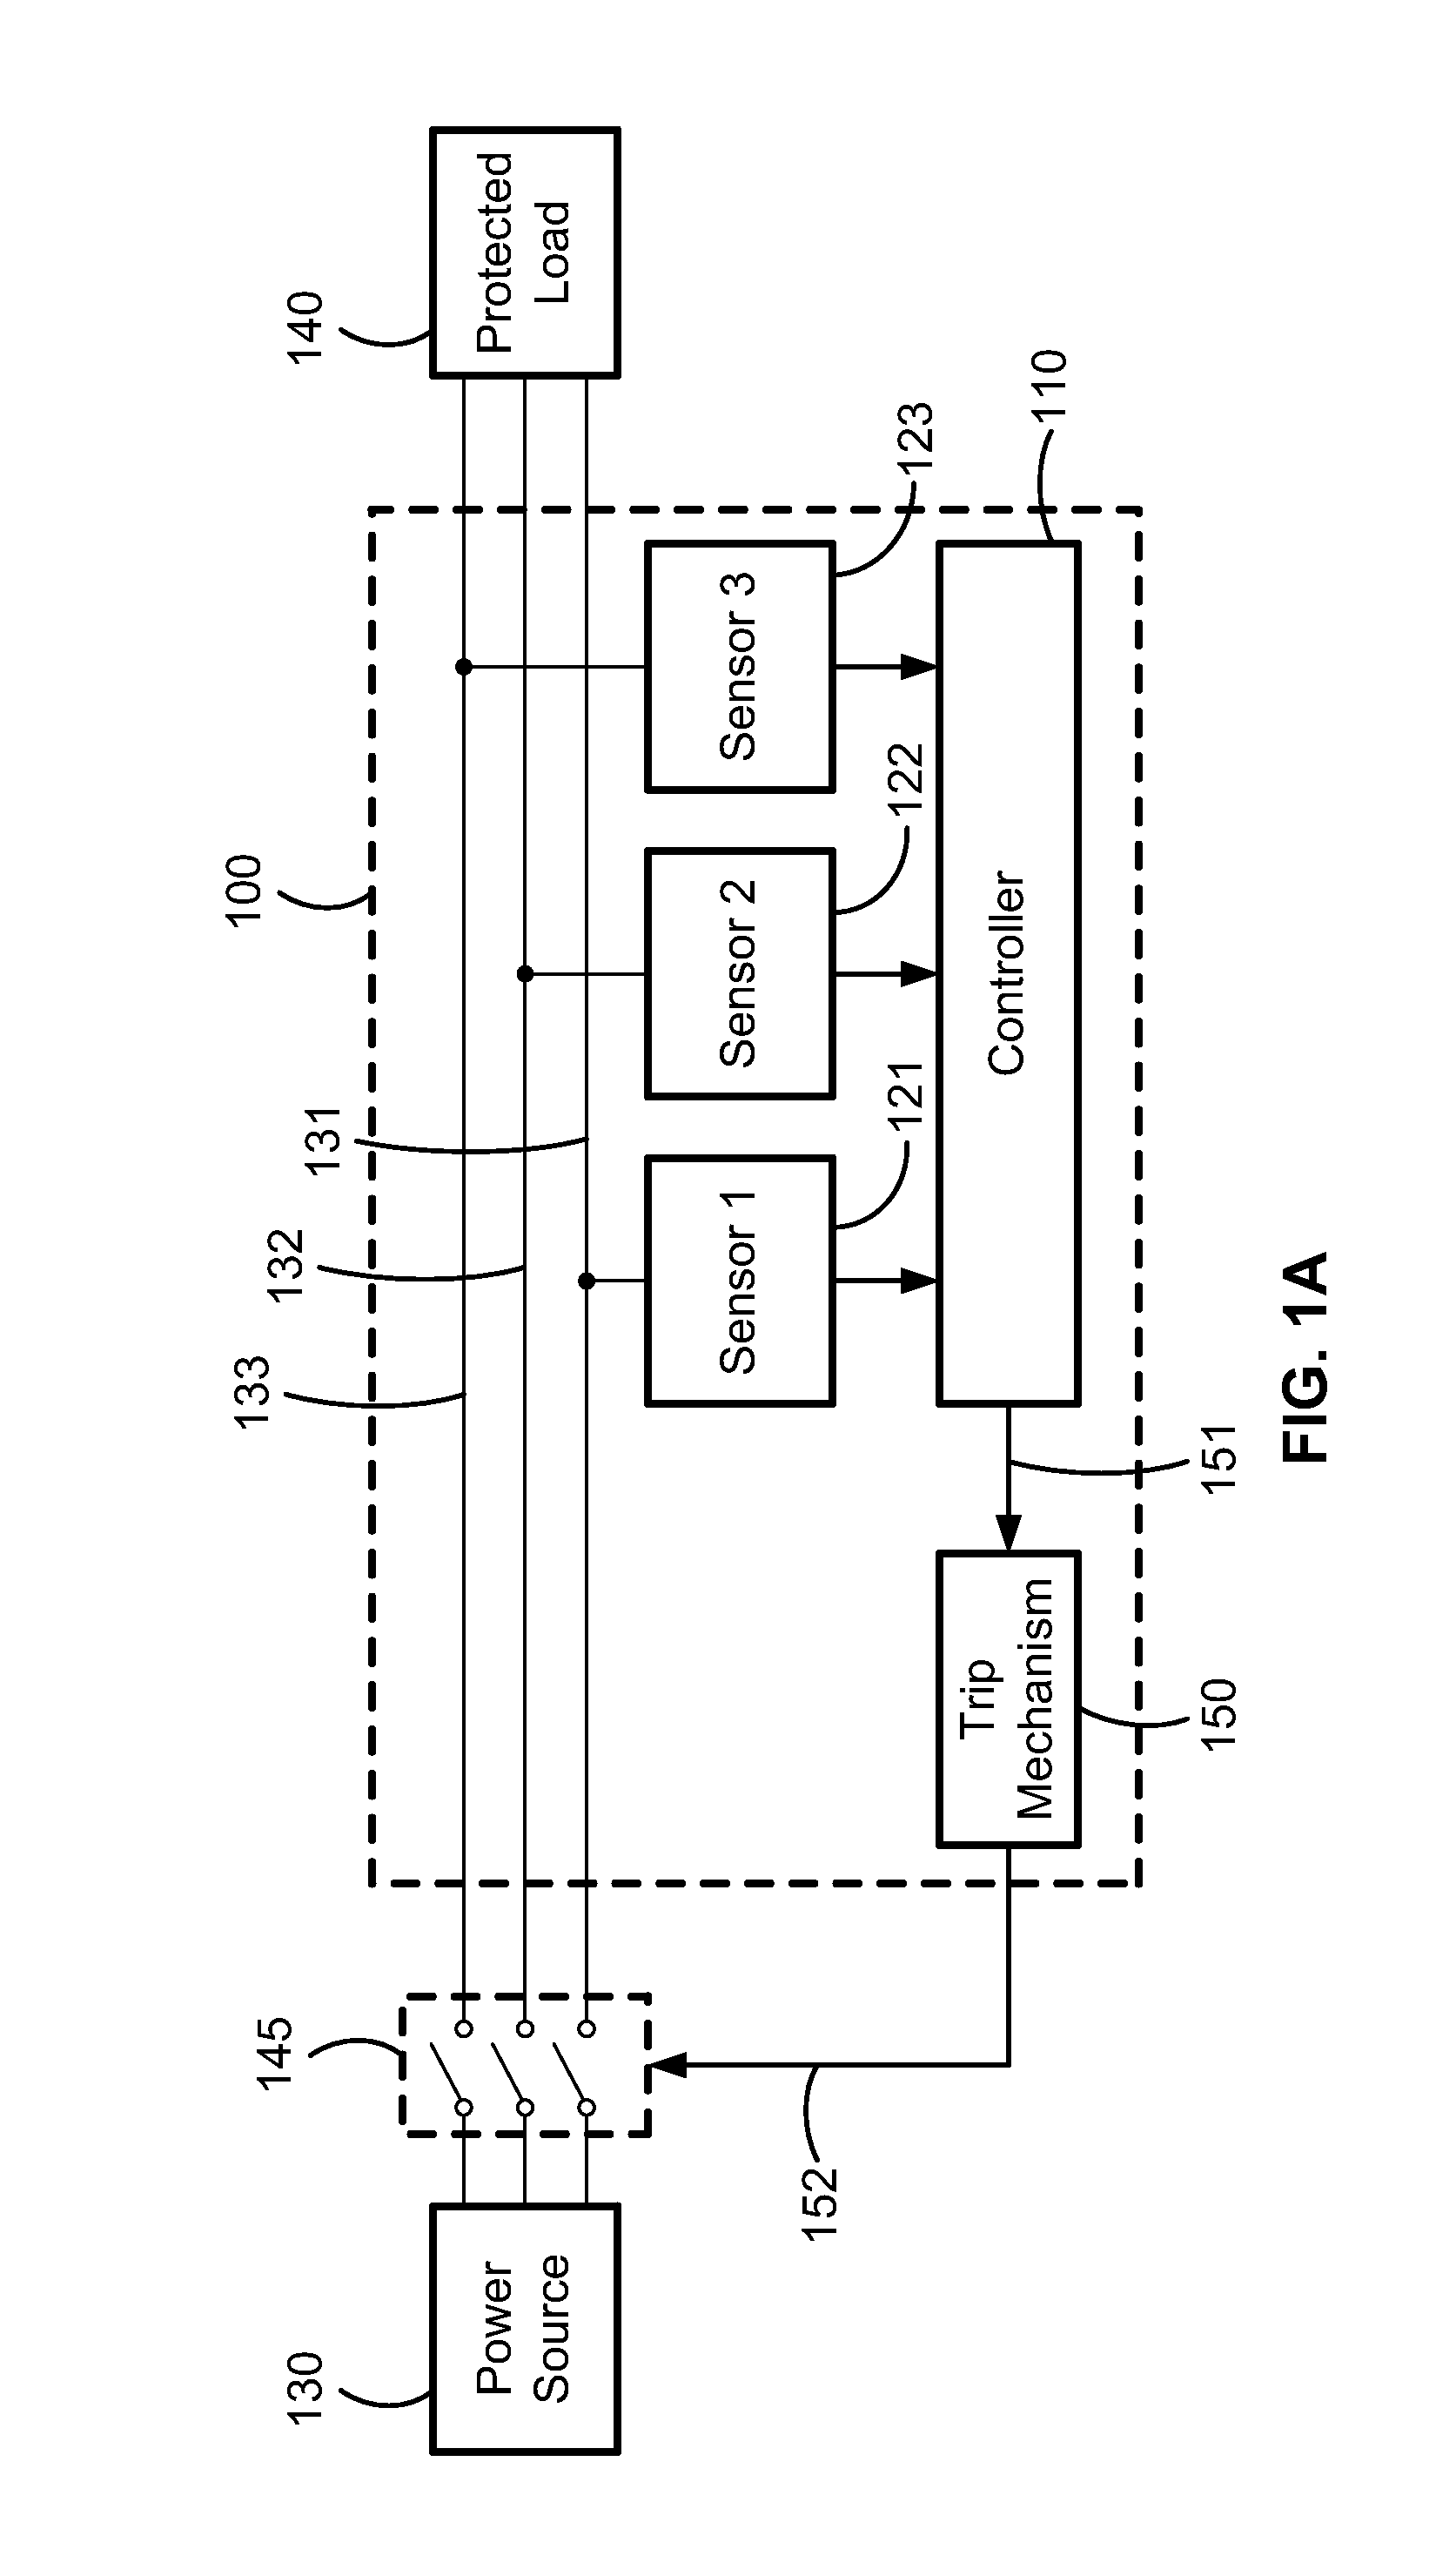 System and method for monitoring current drawn by a protected load in a self-powered electronic protection device